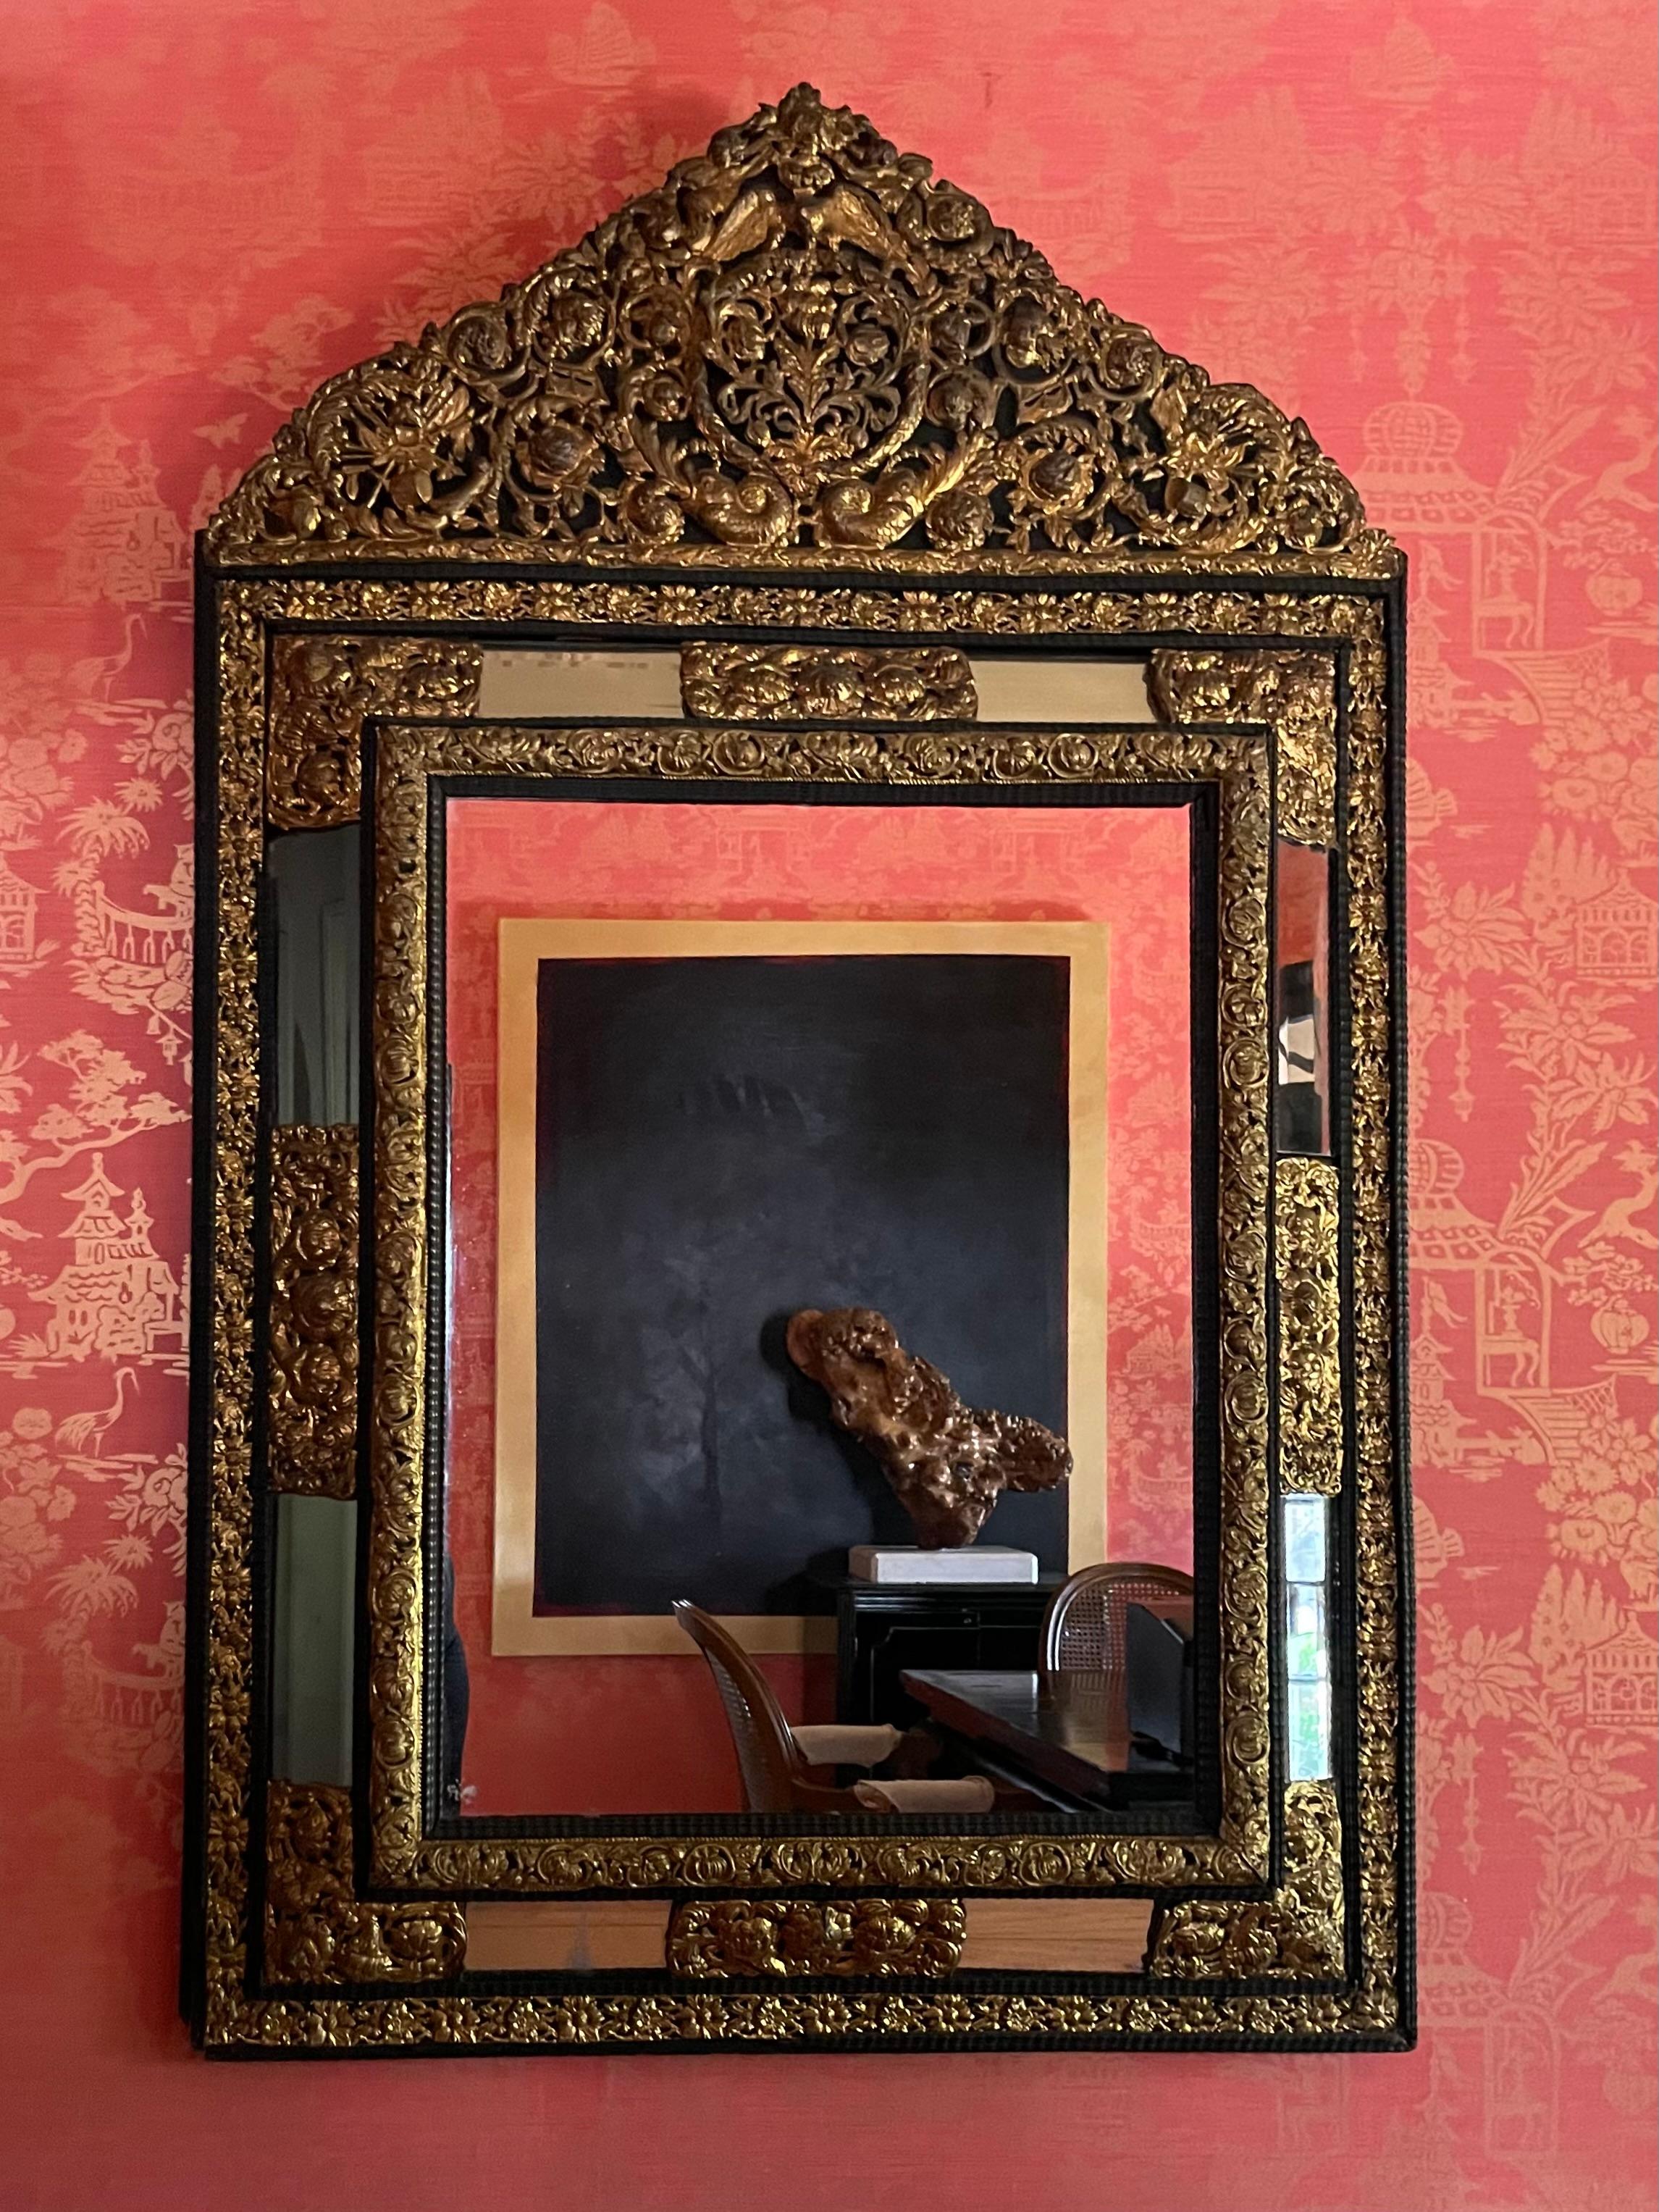 A monumental, stunning, and beautifully designed French Ebony repousse brass mirror with beveled glass. Hand-hammered with intricate French angels, drums. A very substantial and important look. The mirror is 75 pounds in weight. (A very small and